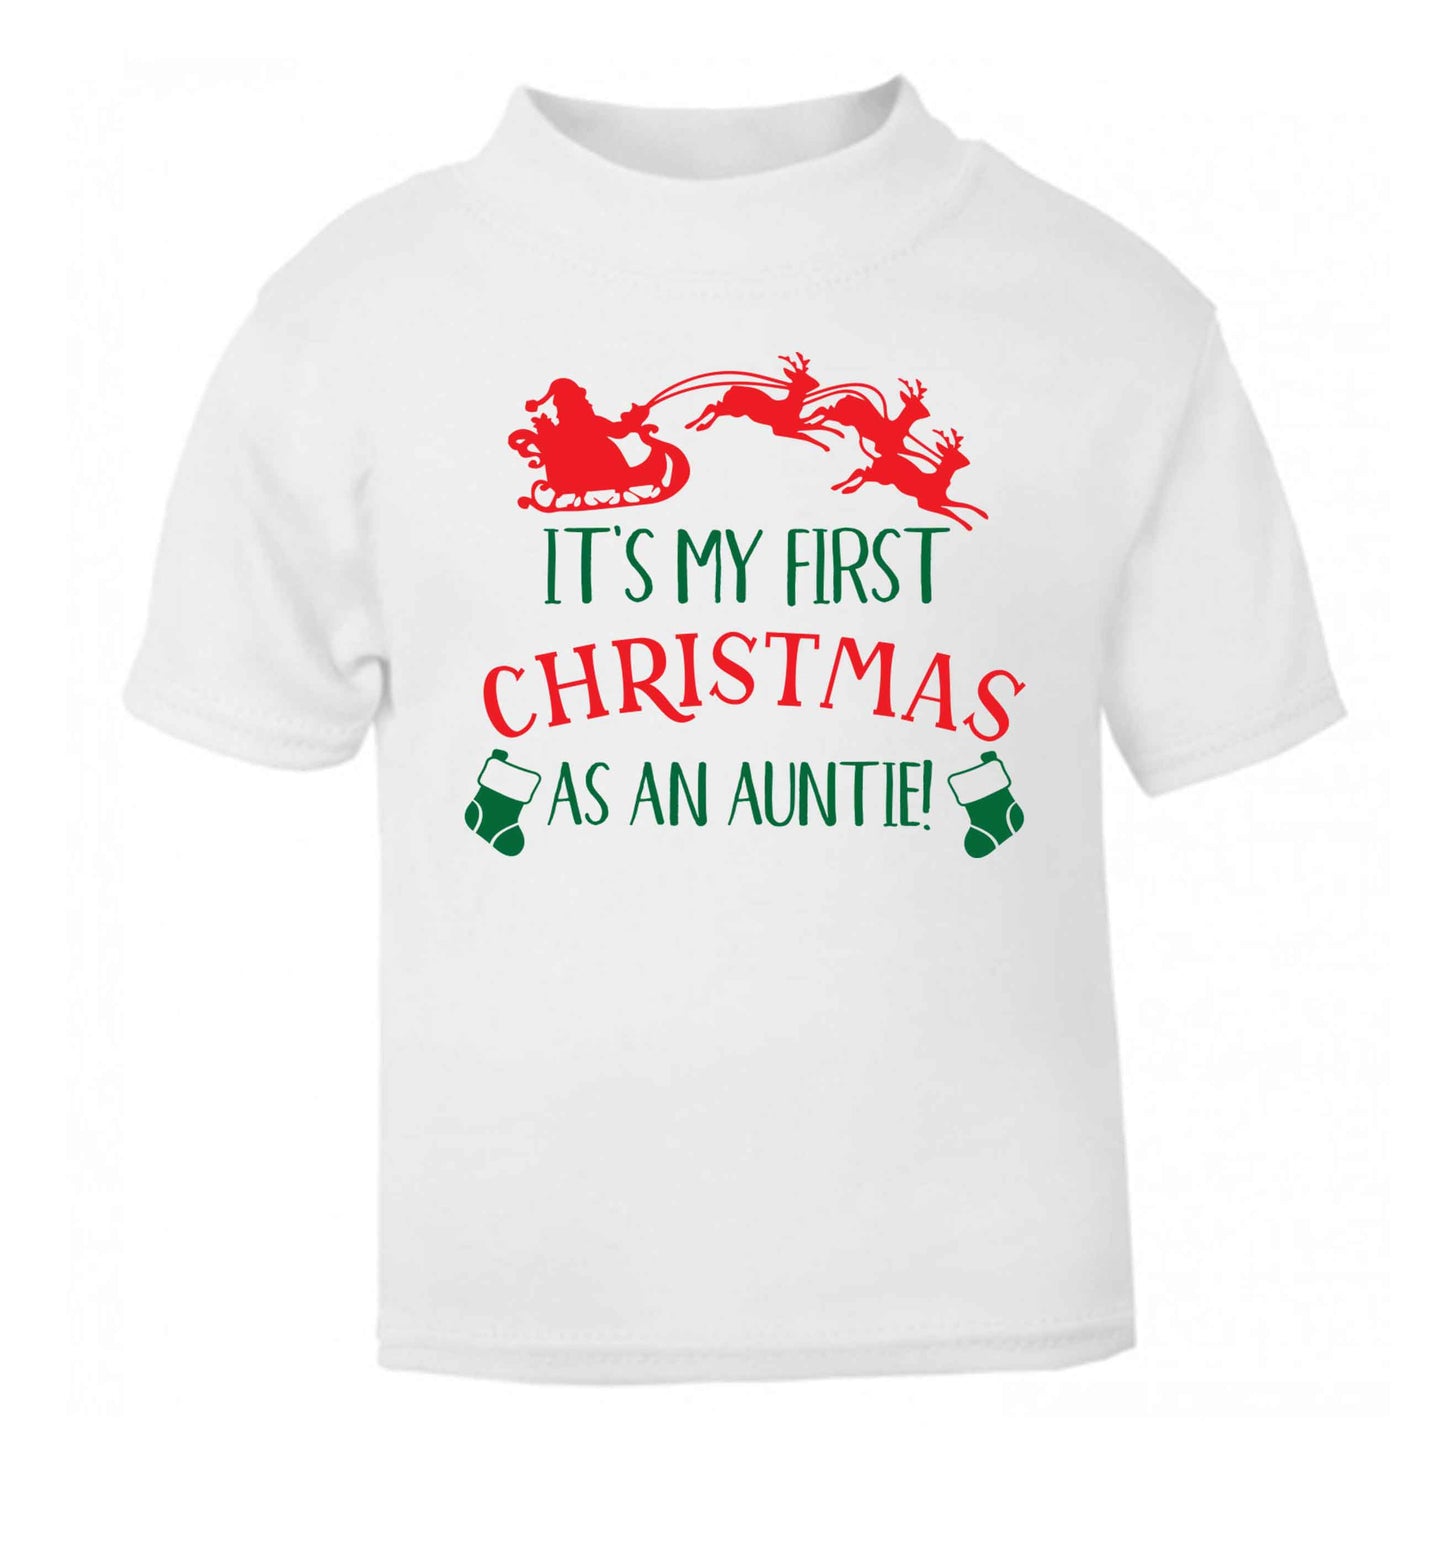 It's my first Christmas as an auntie! white Baby Toddler Tshirt 2 Years